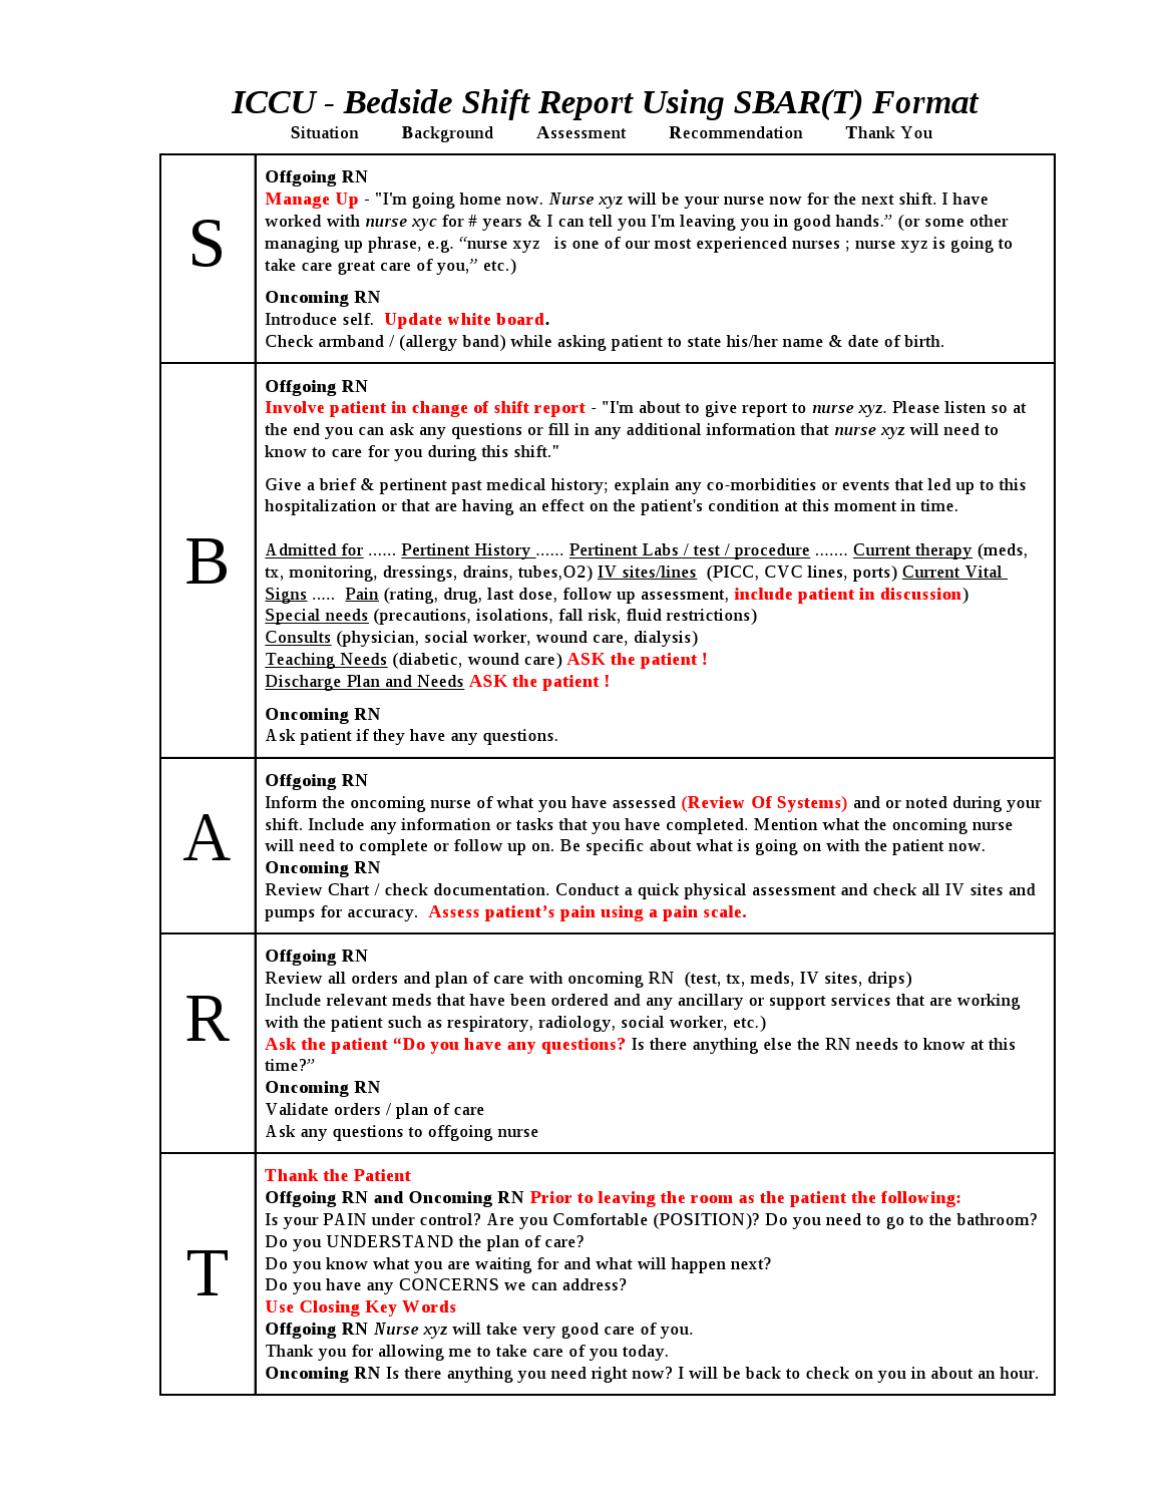 027 Page 1 Nursing Shift Report Template Unforgettable Ideas Within Sbar Template Word